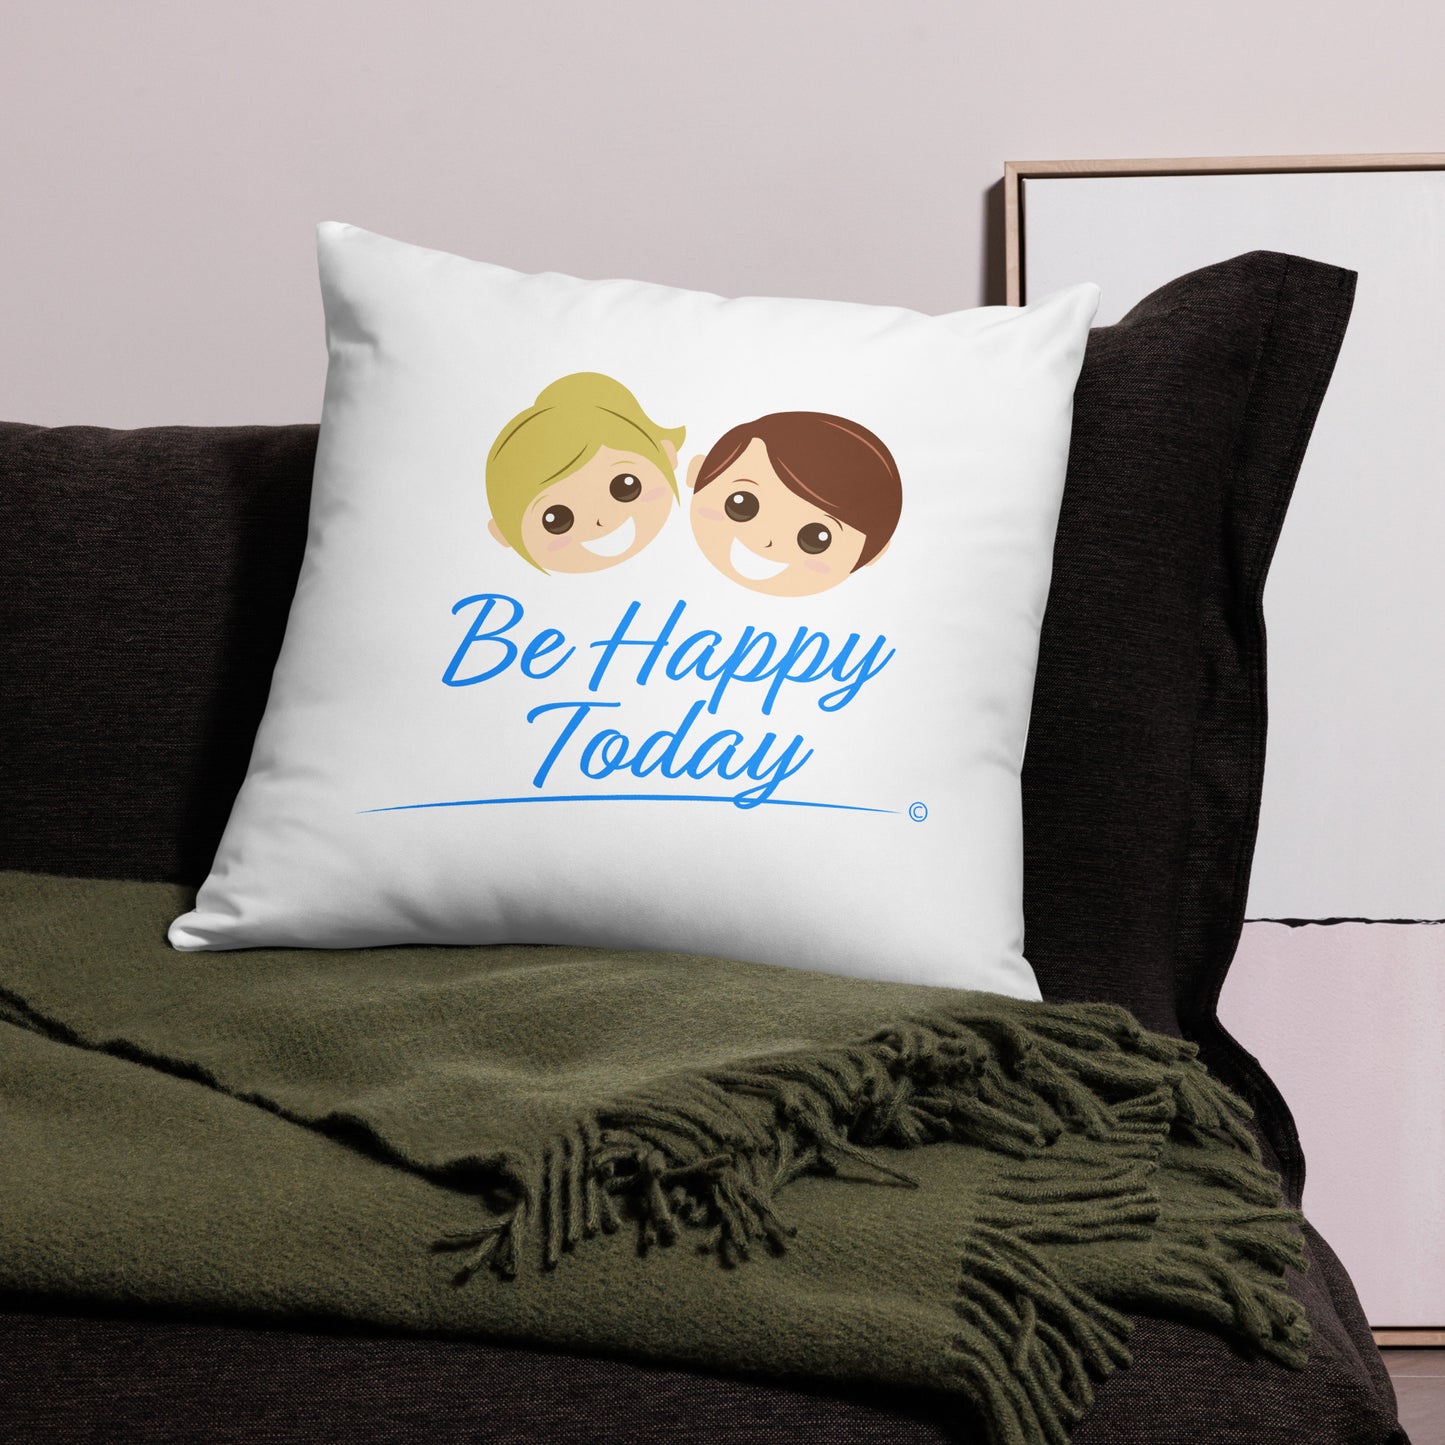 Generously sized 22x22 accent pillow conveying the message 'Be Happy Today,' adding a touch of happiness to a black sofa and a vibrant green scarf.